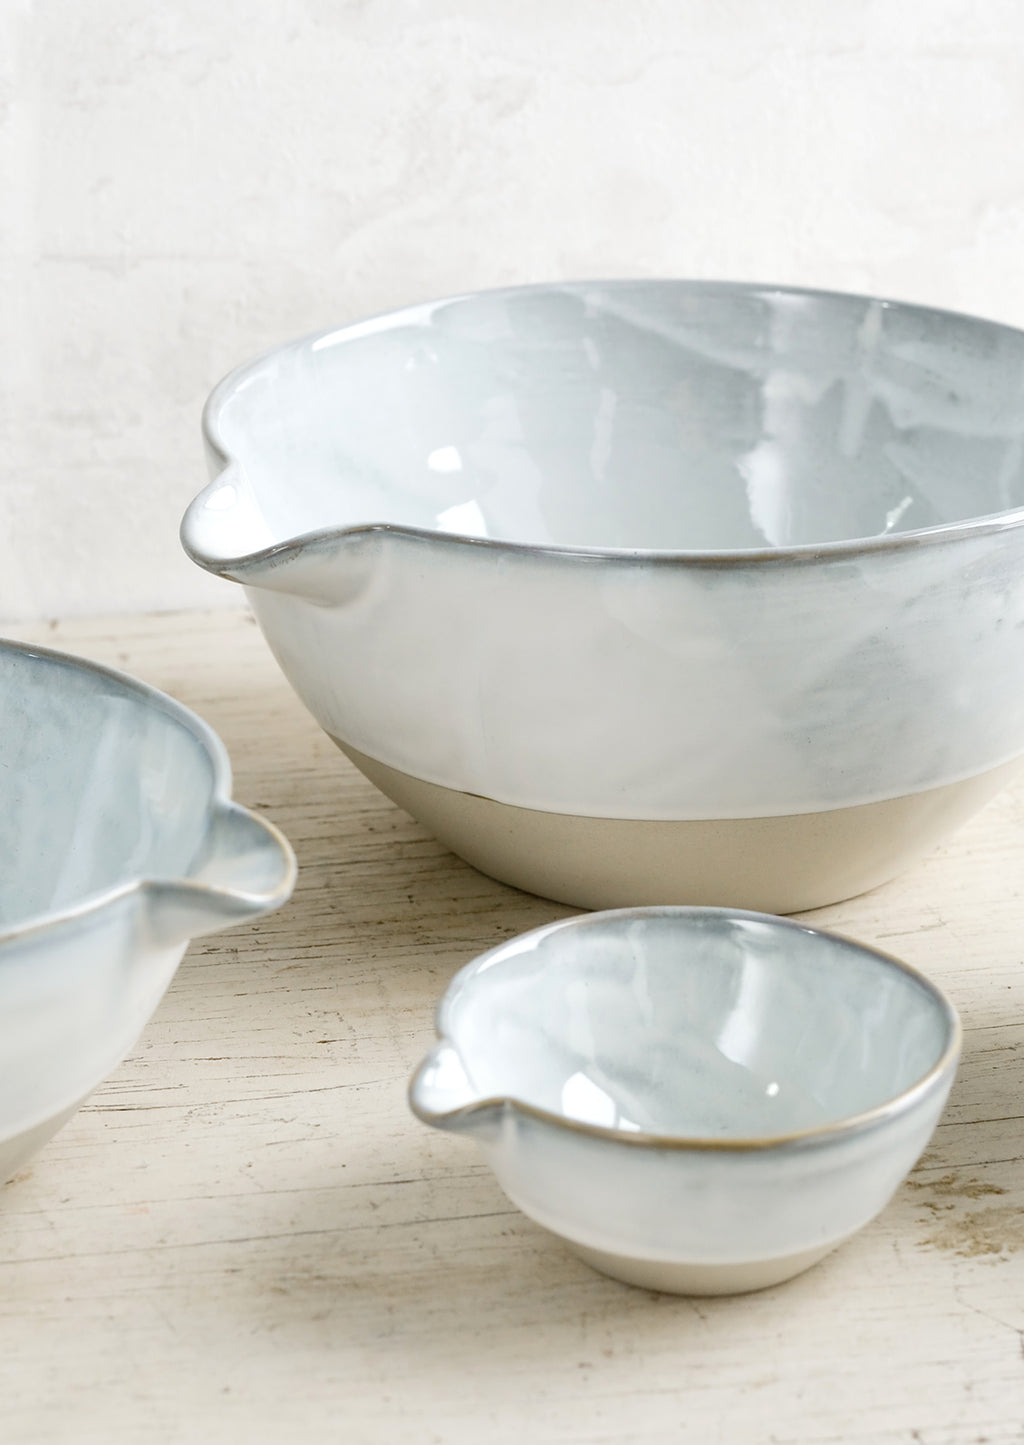 4: Ceramic bowls with pouring spouts in three sizes.